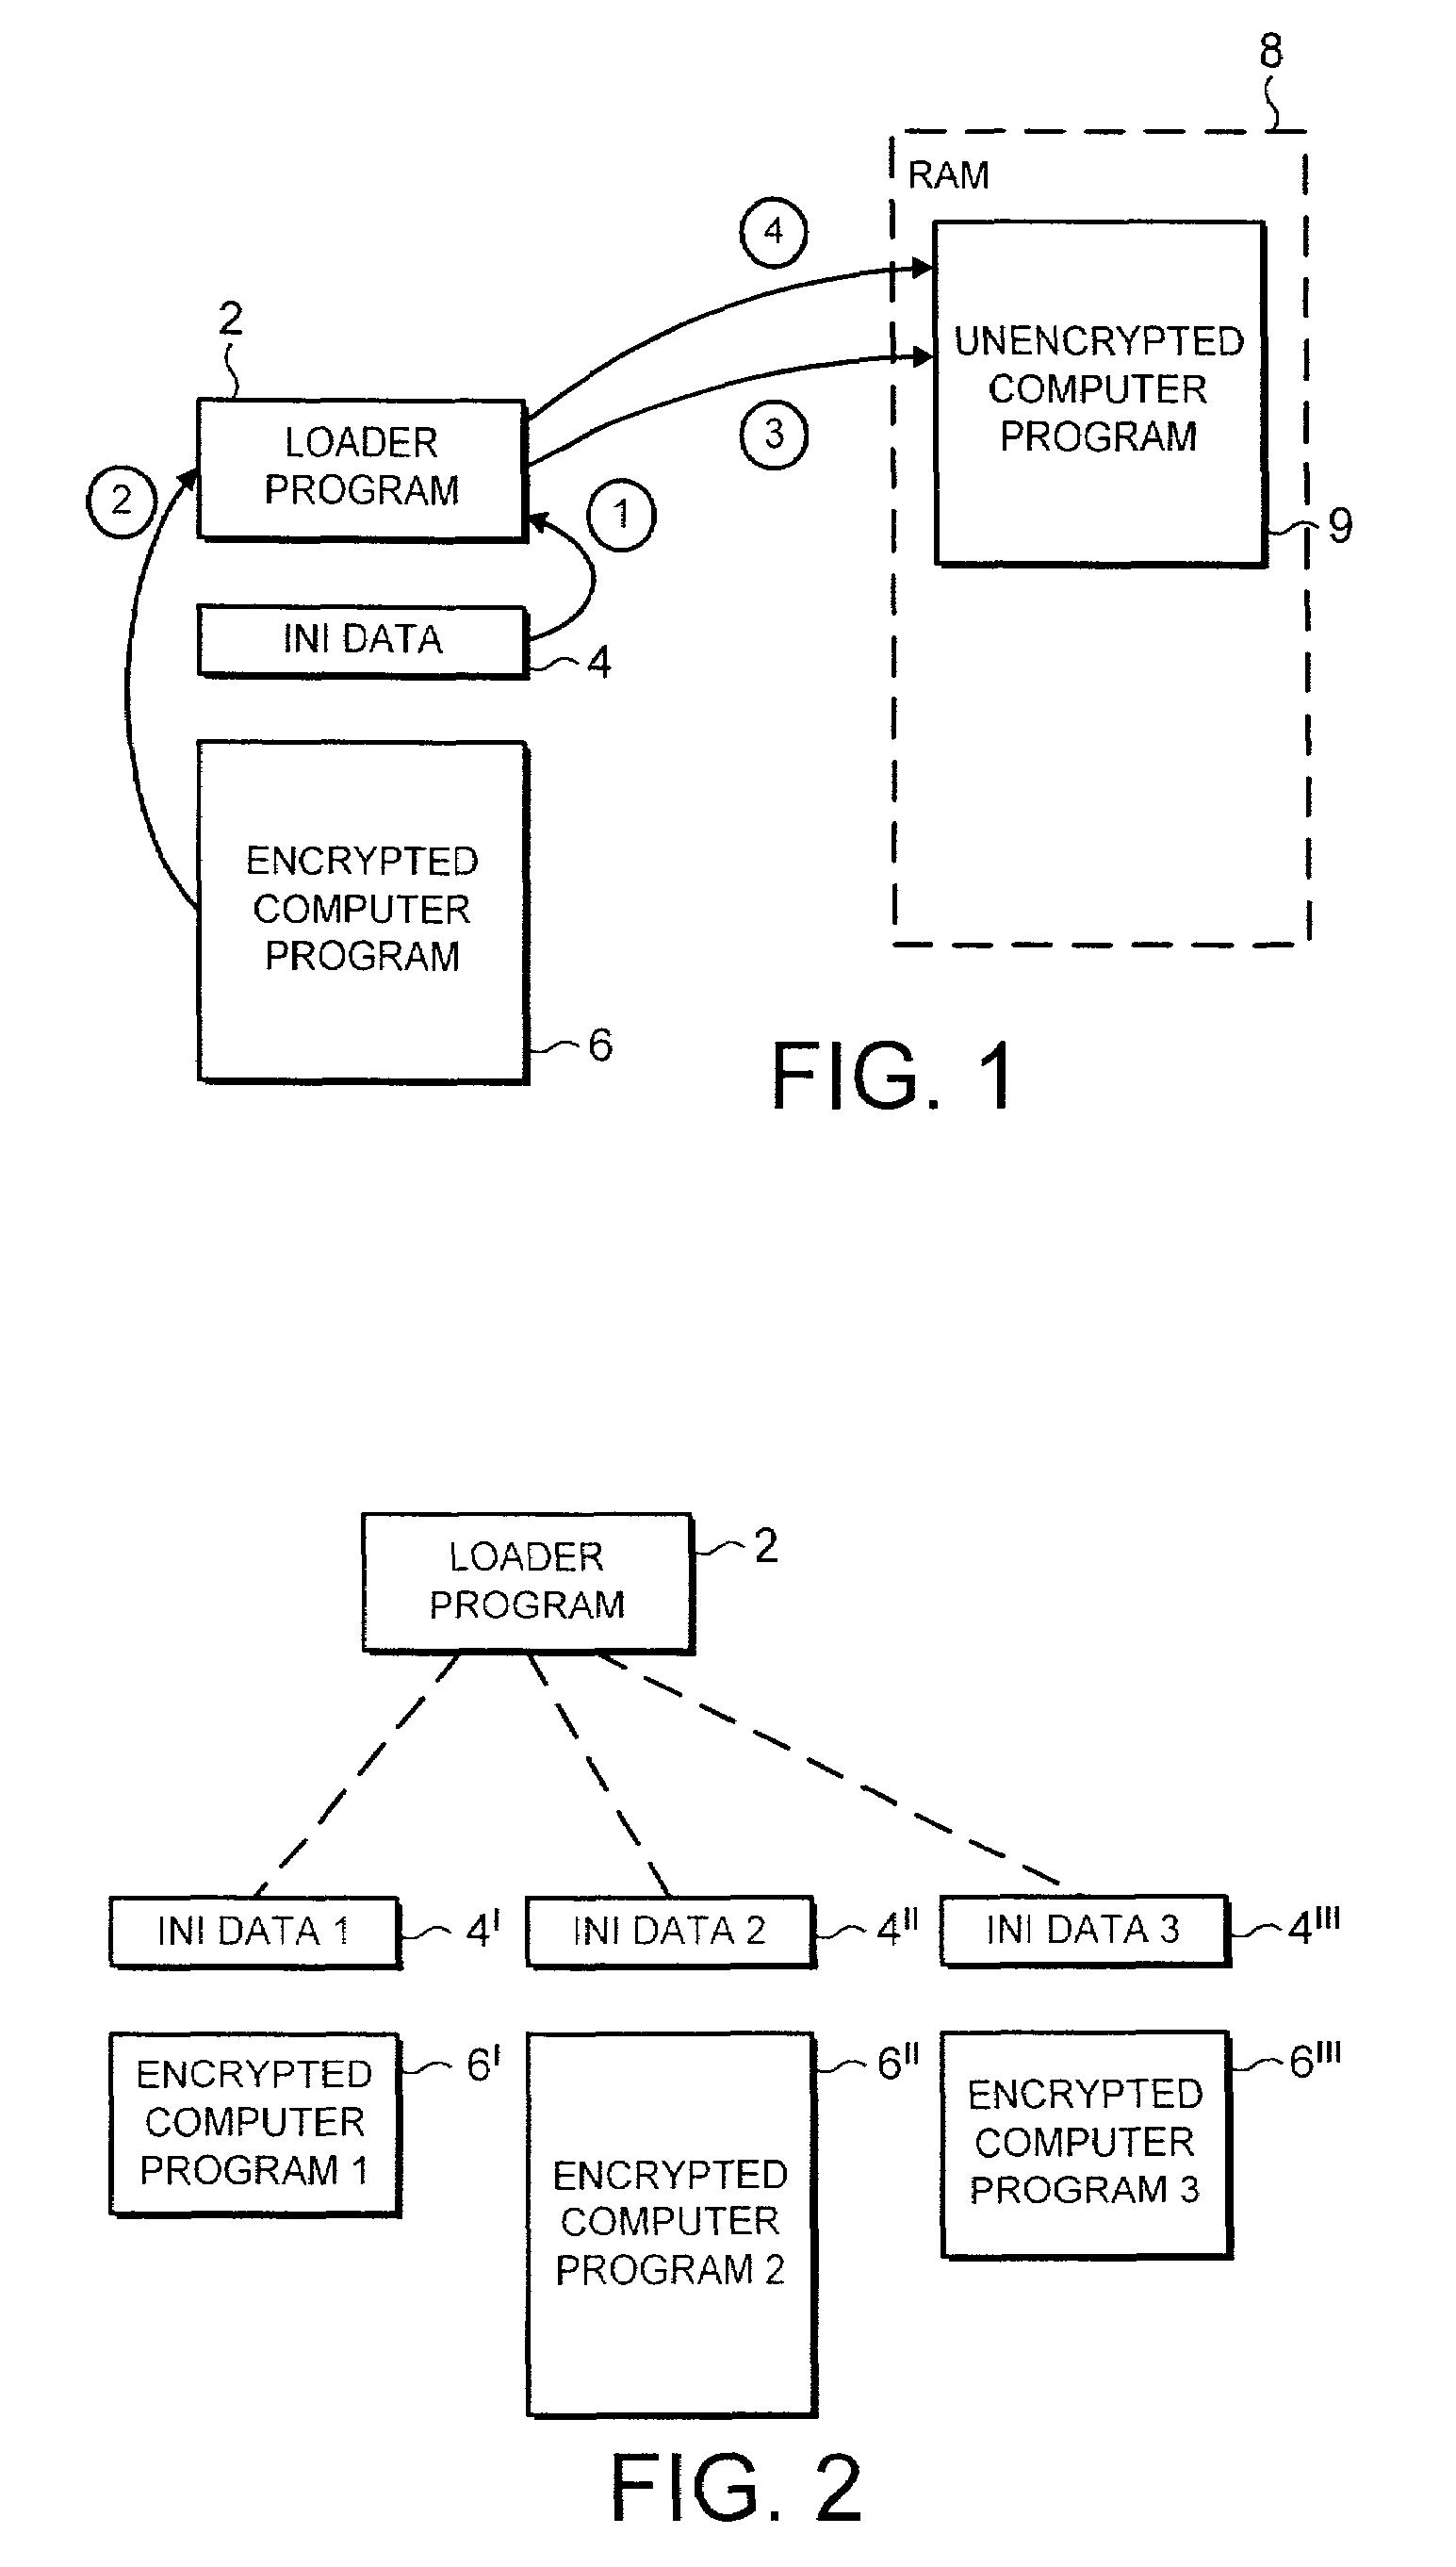 Initiating execution of a computer program from an encrypted version of a computer program